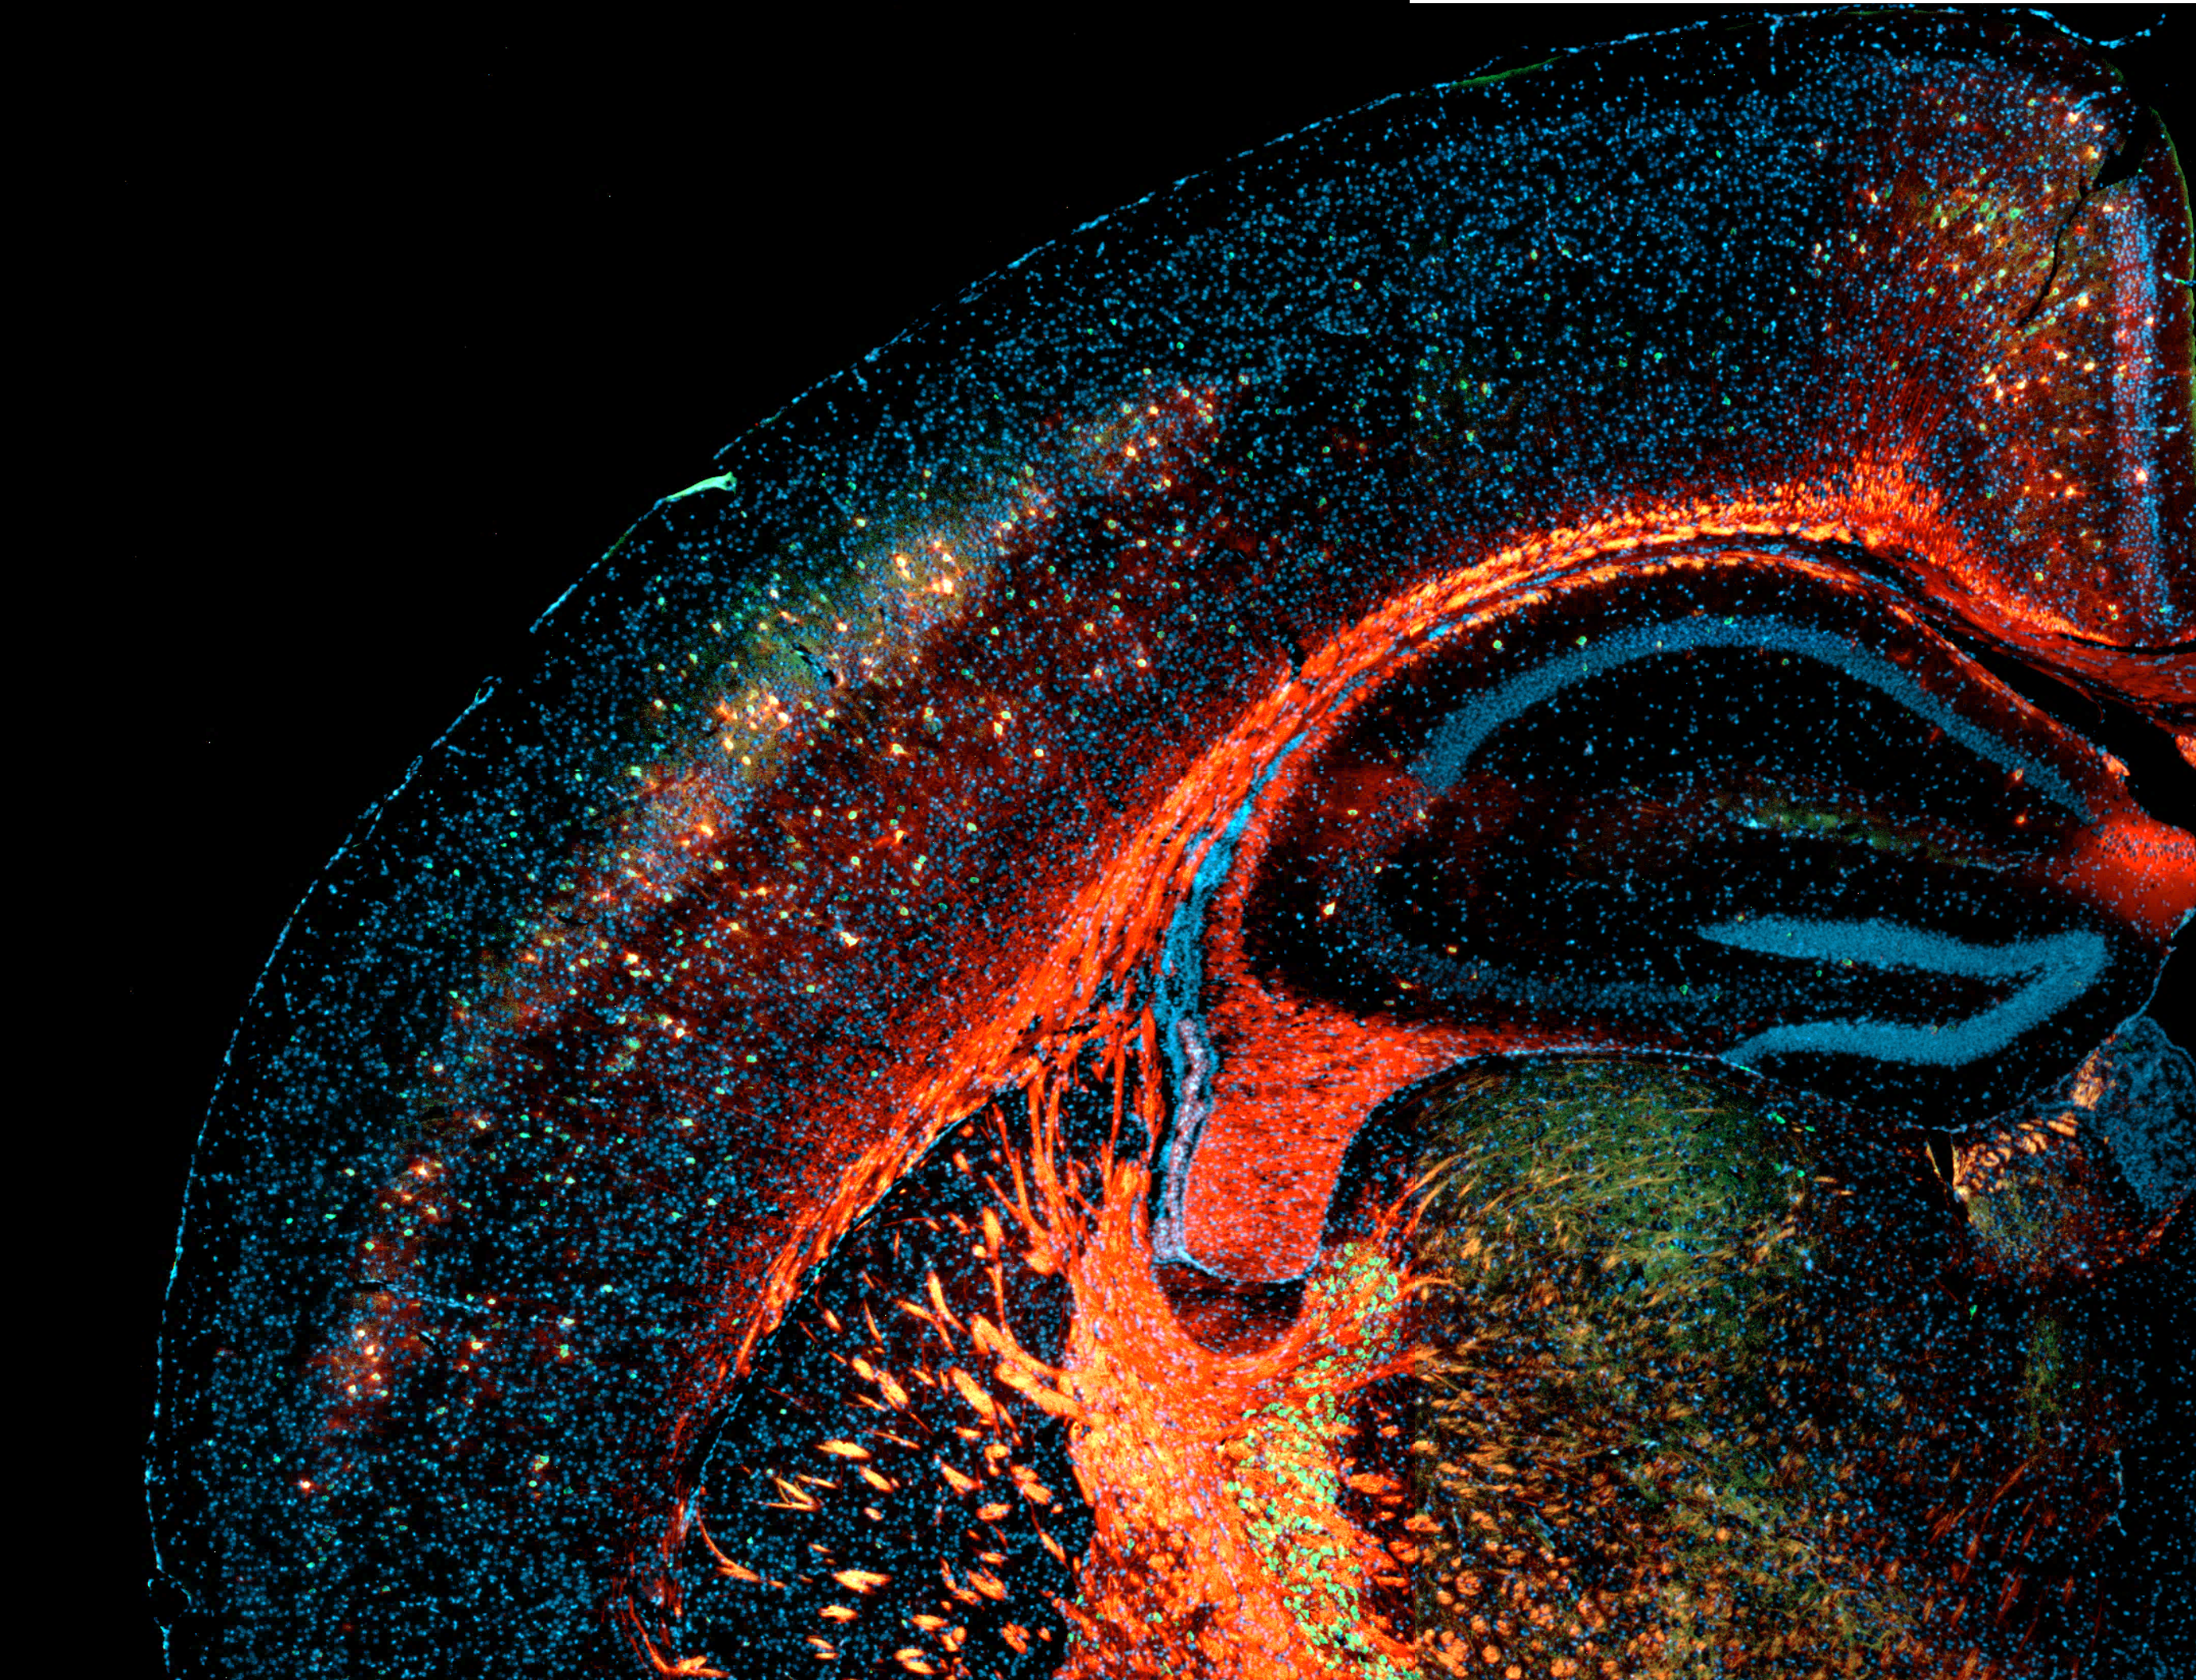 Cortex and hippocampus of the rat brain stained in red with N-acetylgalactosamine-binding Wisteria floribunda agglutinin (WFA*) to visualize perineural nets (and myelin aspecficially lights up) and in green for parvalbumin-positive interneurons. Counterstain of all cell nuclei with DAPI in blue.